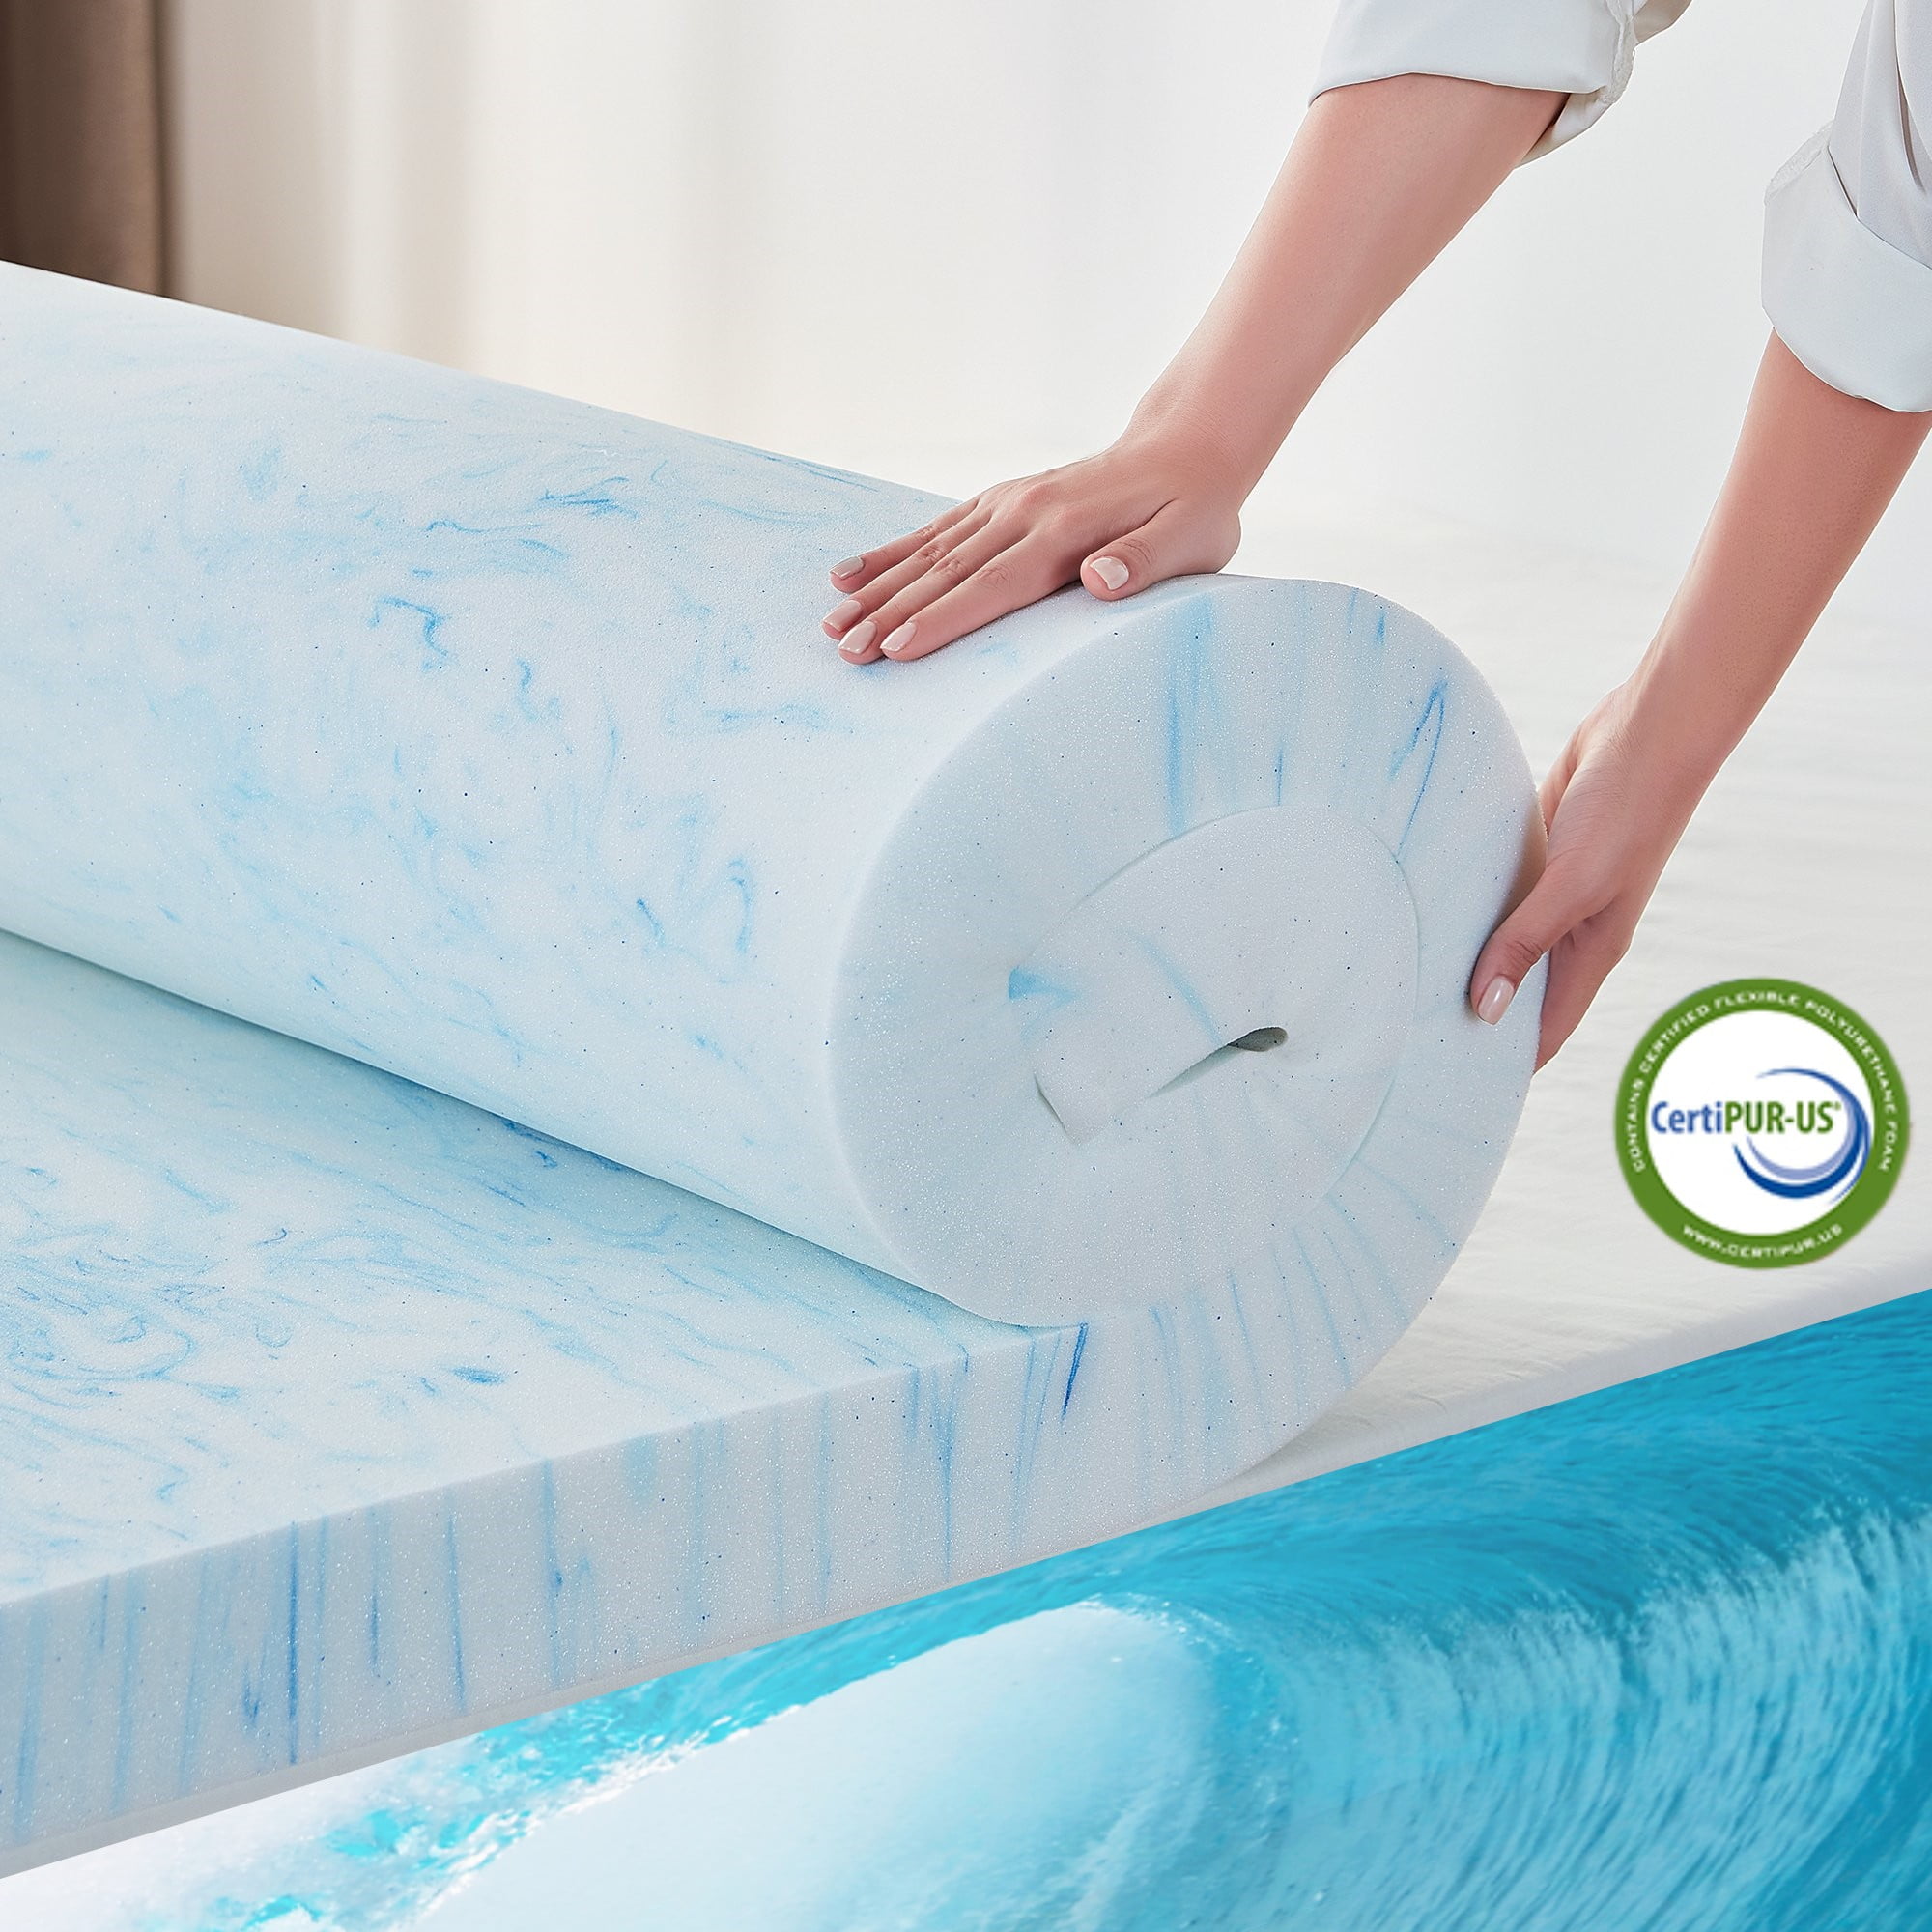 MERITLIFE 3 Inch Memory Foam Mattress Topper,Cool Gel Infused Foam Bed  Topper Mattress Pad,CertiPUR-US Certified,Relieve Back Pain & Pressure  Relief,Removable Soft Cover,10 Year Warranty,Queen SIze - Coupon Codes,  Promo Codes, Daily Deals